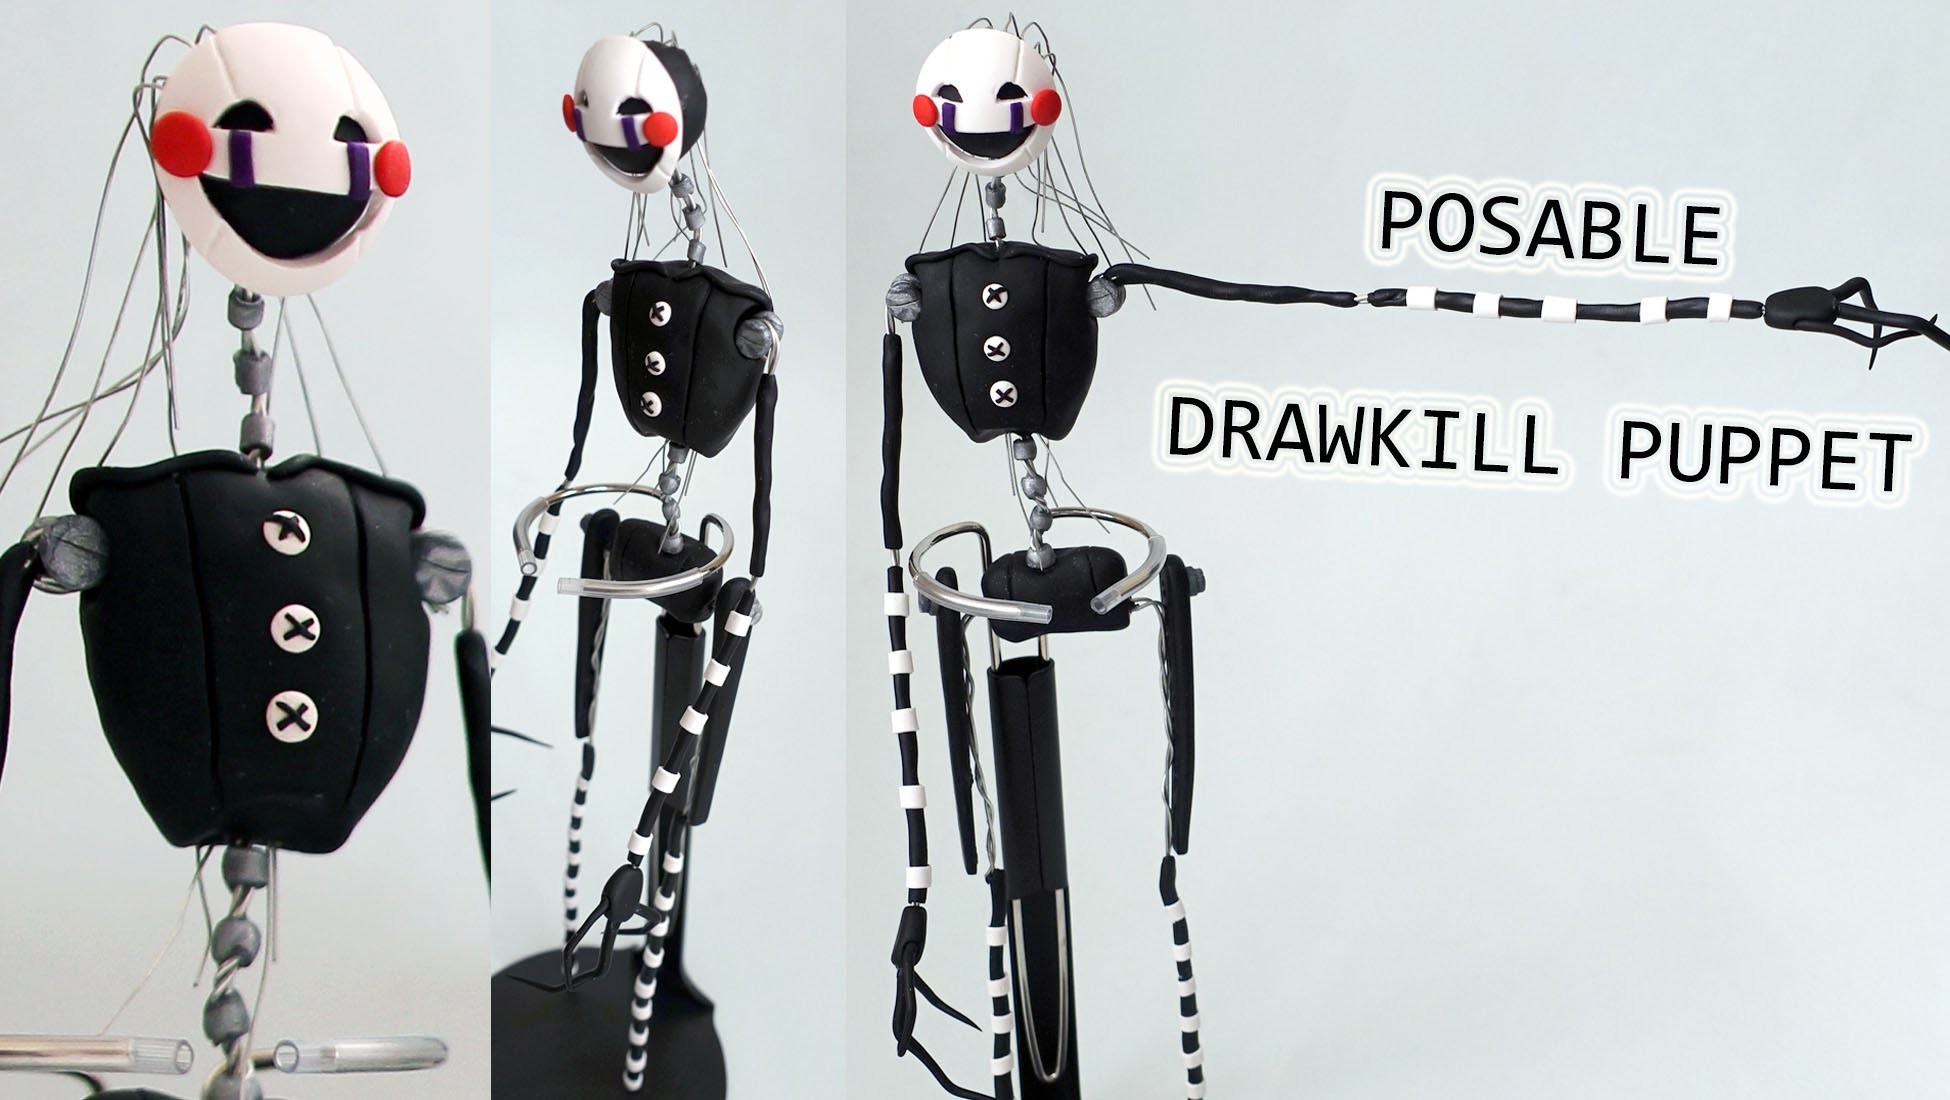 Drawkill Puppet Posable Figure Tutorial